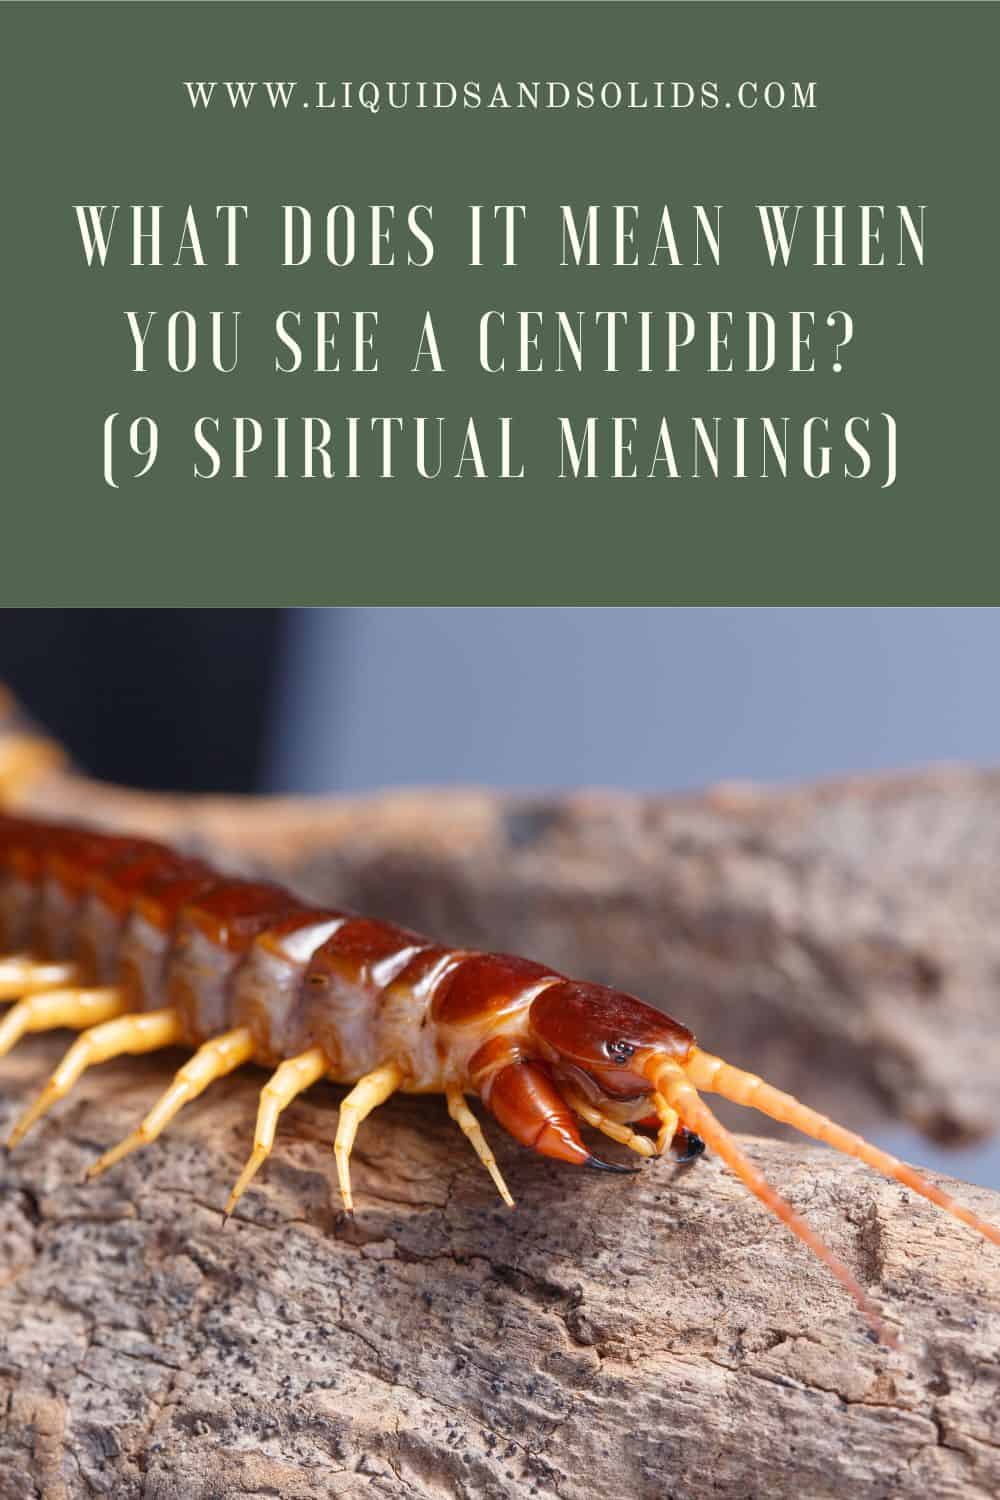 9 Meanings to seeing a centipede